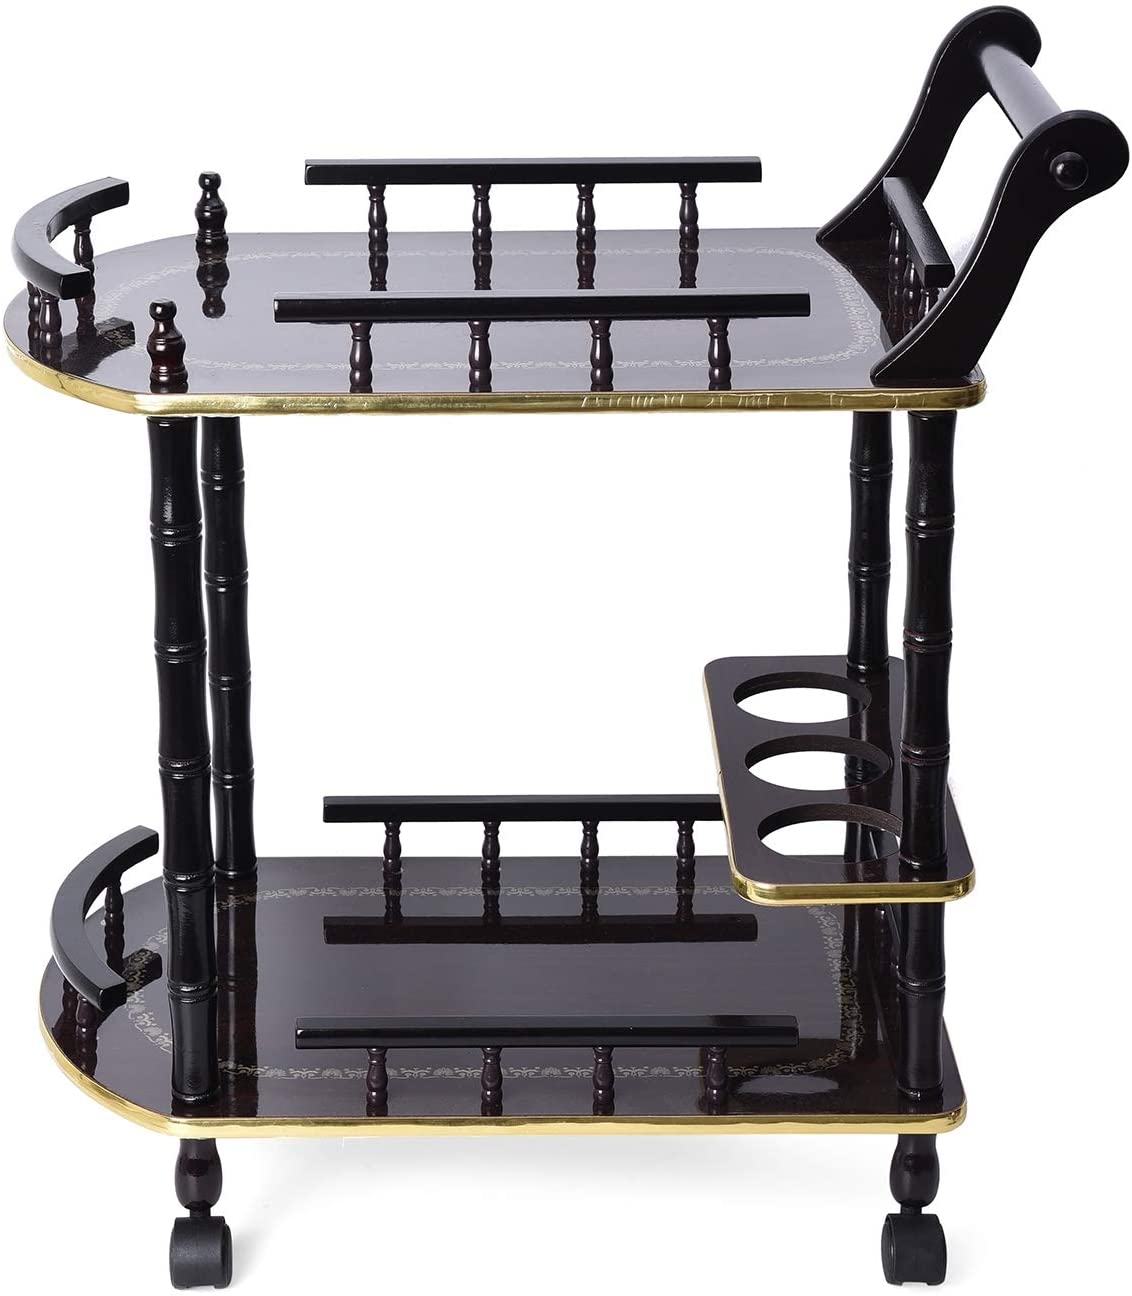 10 Best Serving Trolleys in 2021 Reviews | Good Products for Users